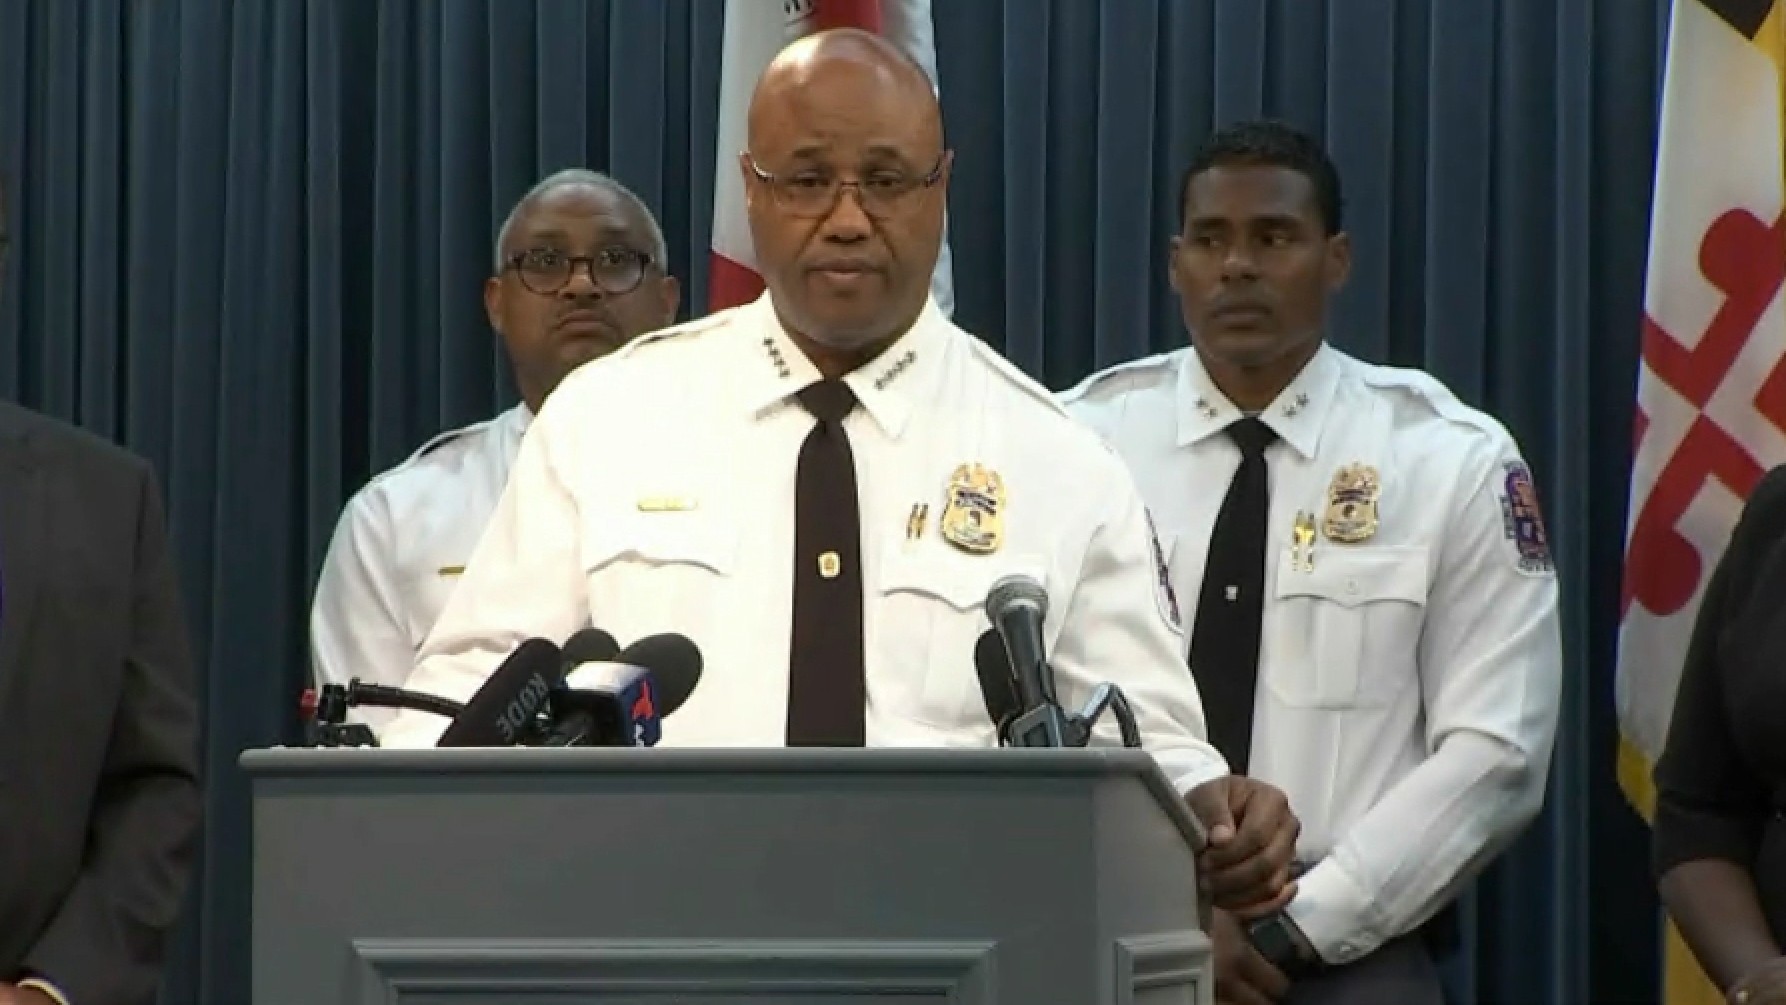 13 Prince George's Officers Charged in Alleged Double-Dipping Scheme